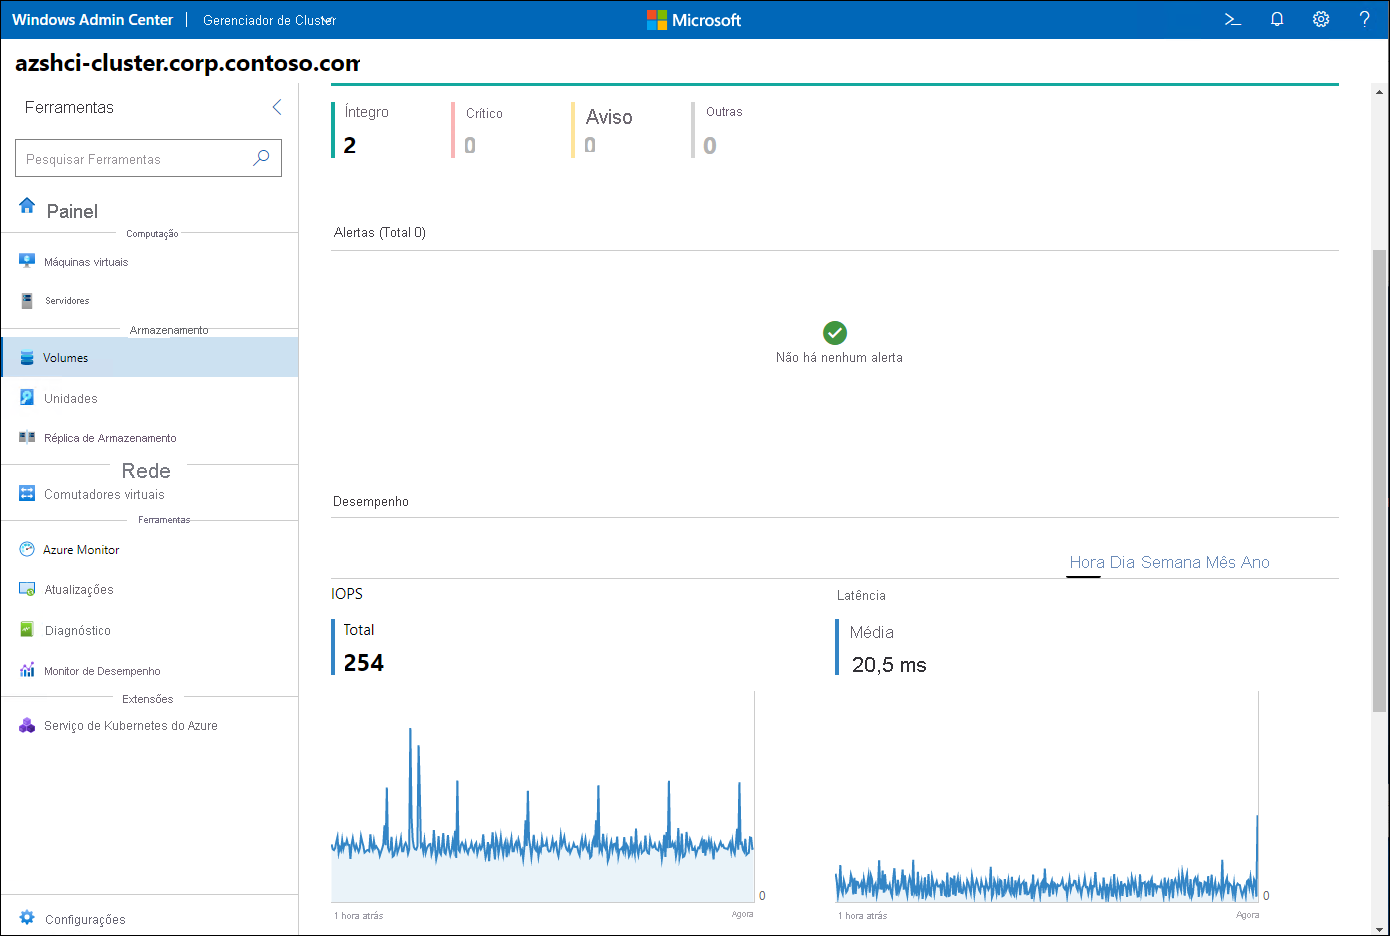 The screenshot depicts the Windows Admin Center dashboard displaying information about the status and performance of cluster volumes.